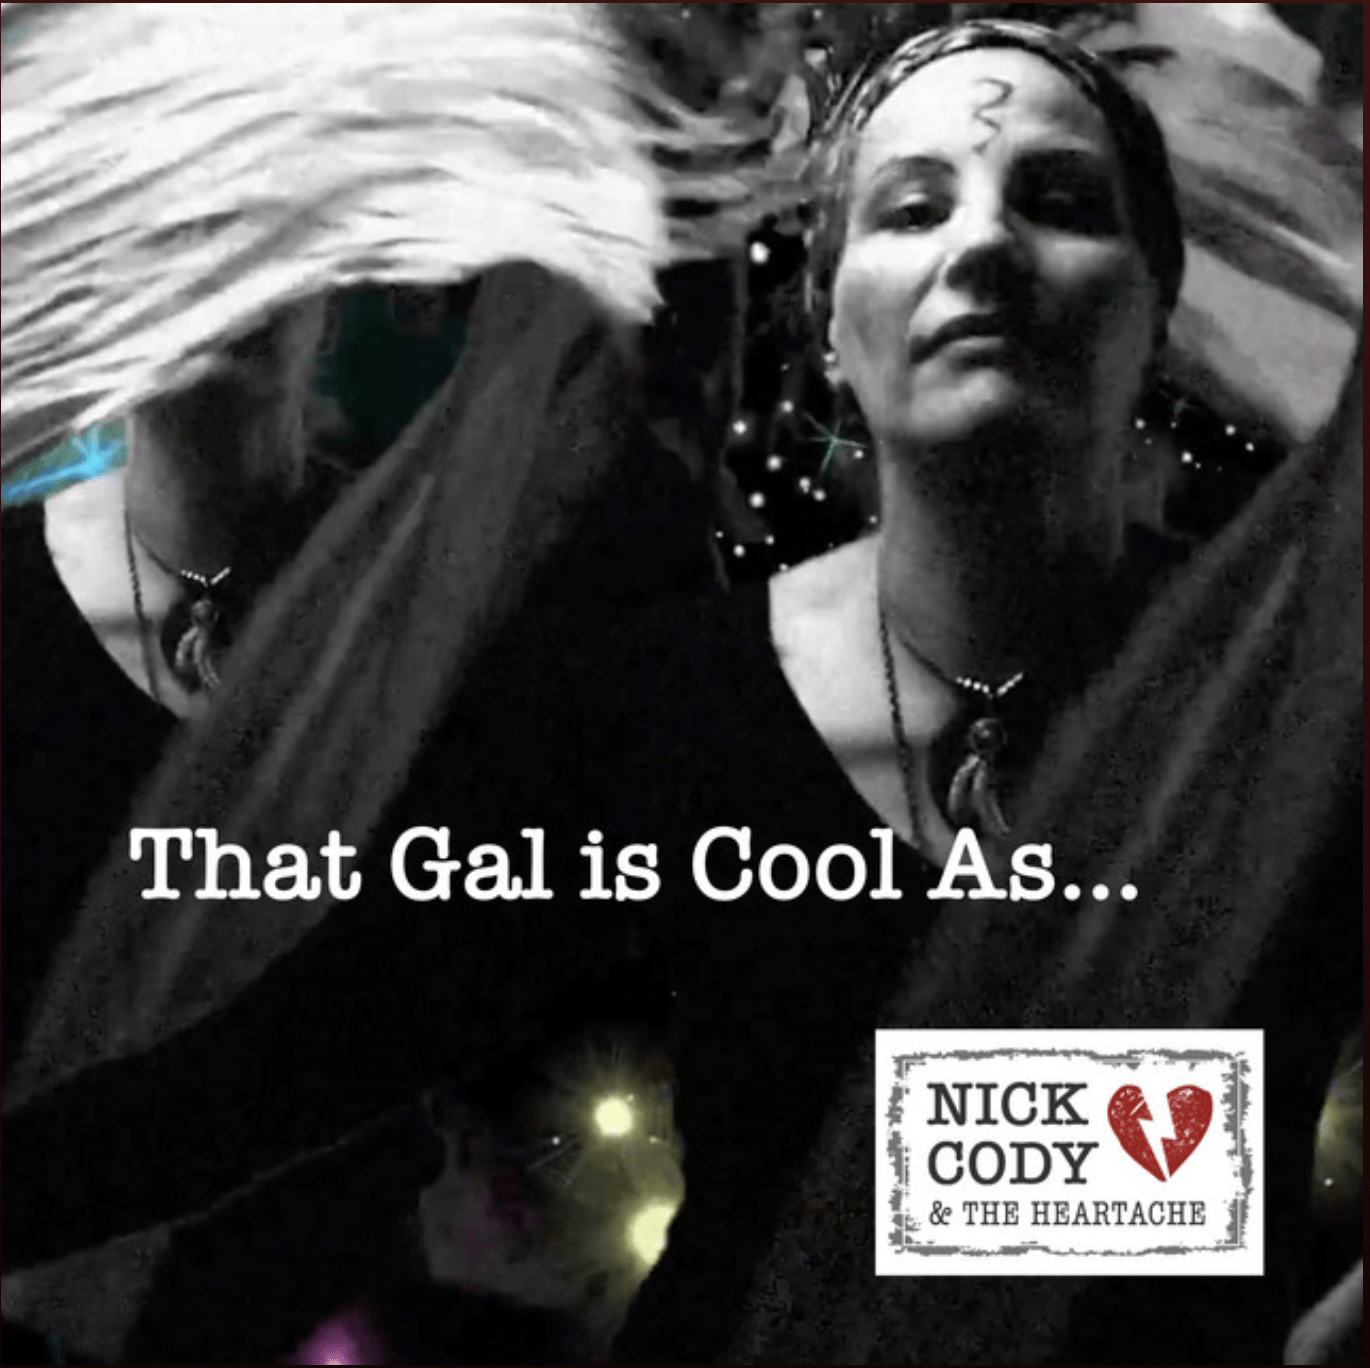 That Gal (Original Single) By Nick Cody And The Heartache